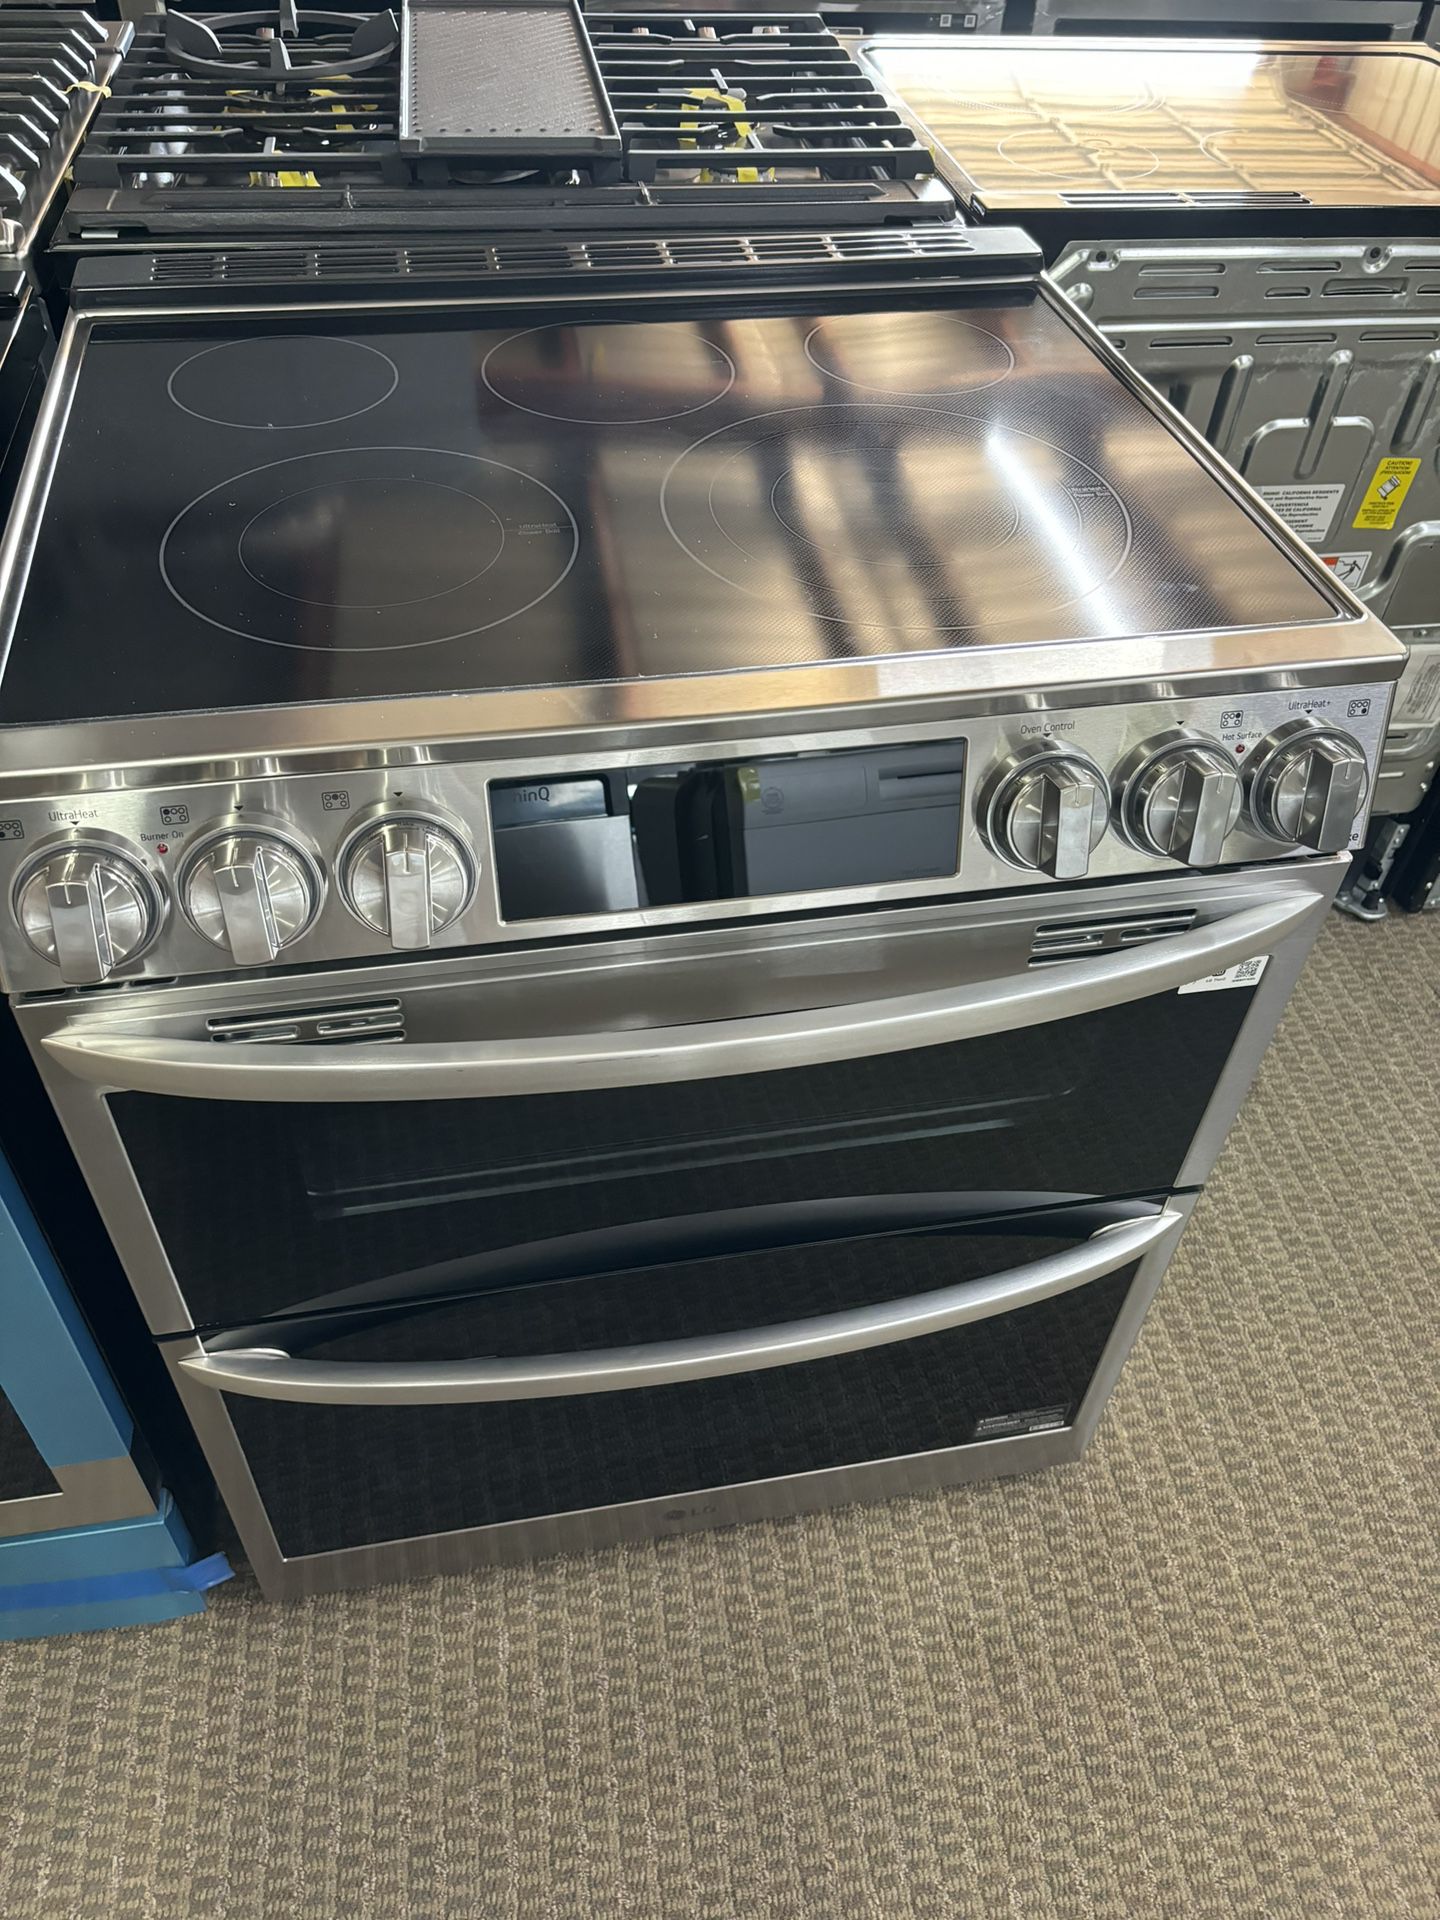 Slide In Electric Double Oven 